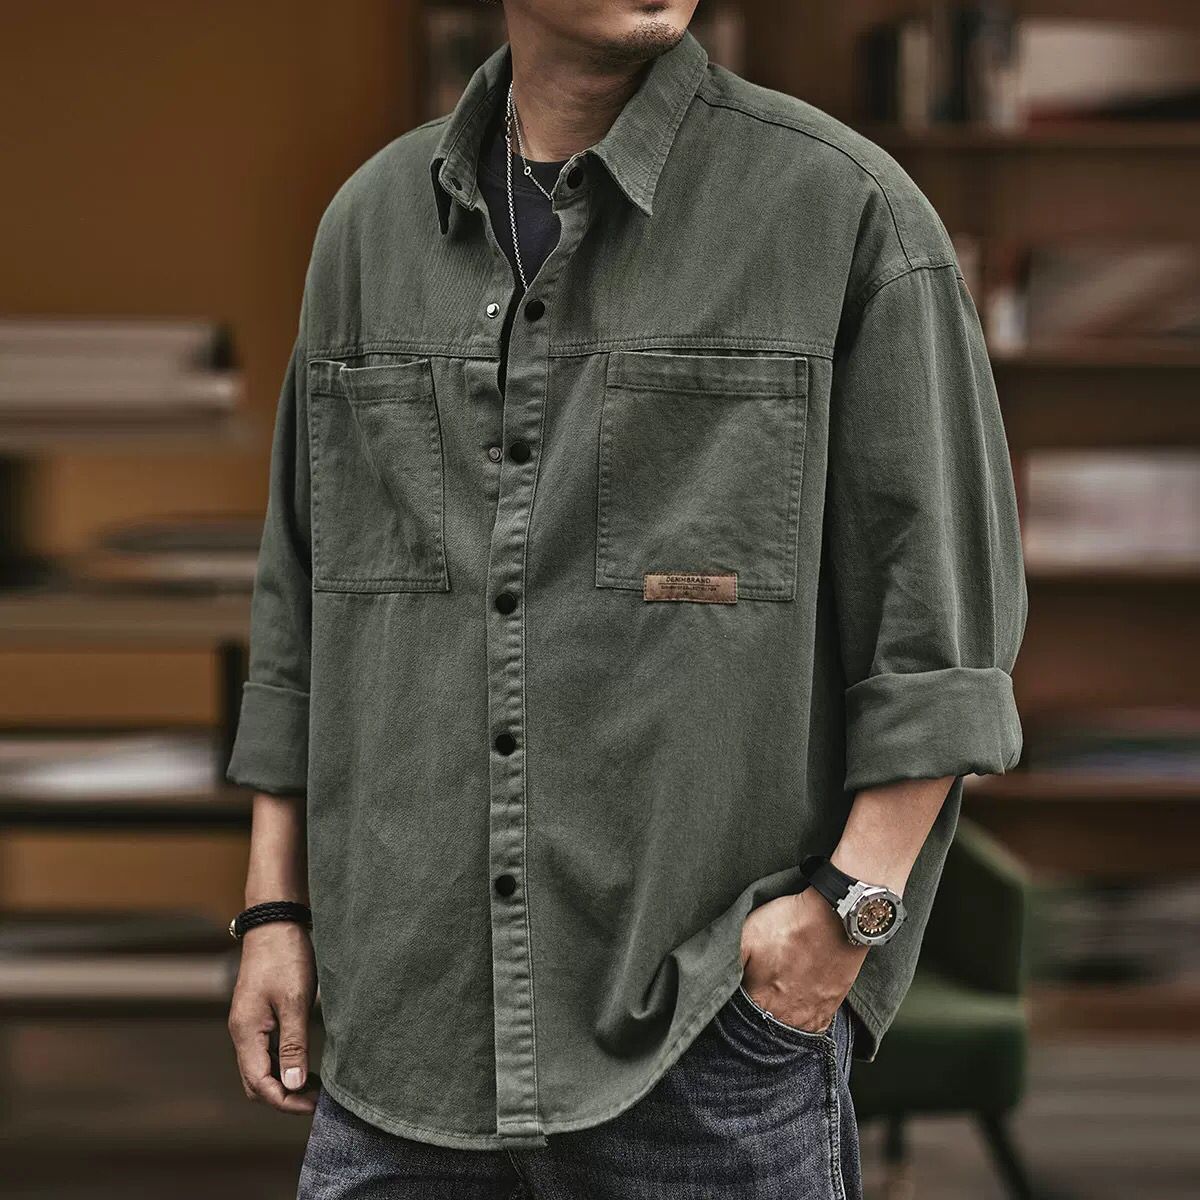 American retro casual men's tooling shirt jacket 2022 spring and autumn construction site loose tide brand men's long-sleeved shirt